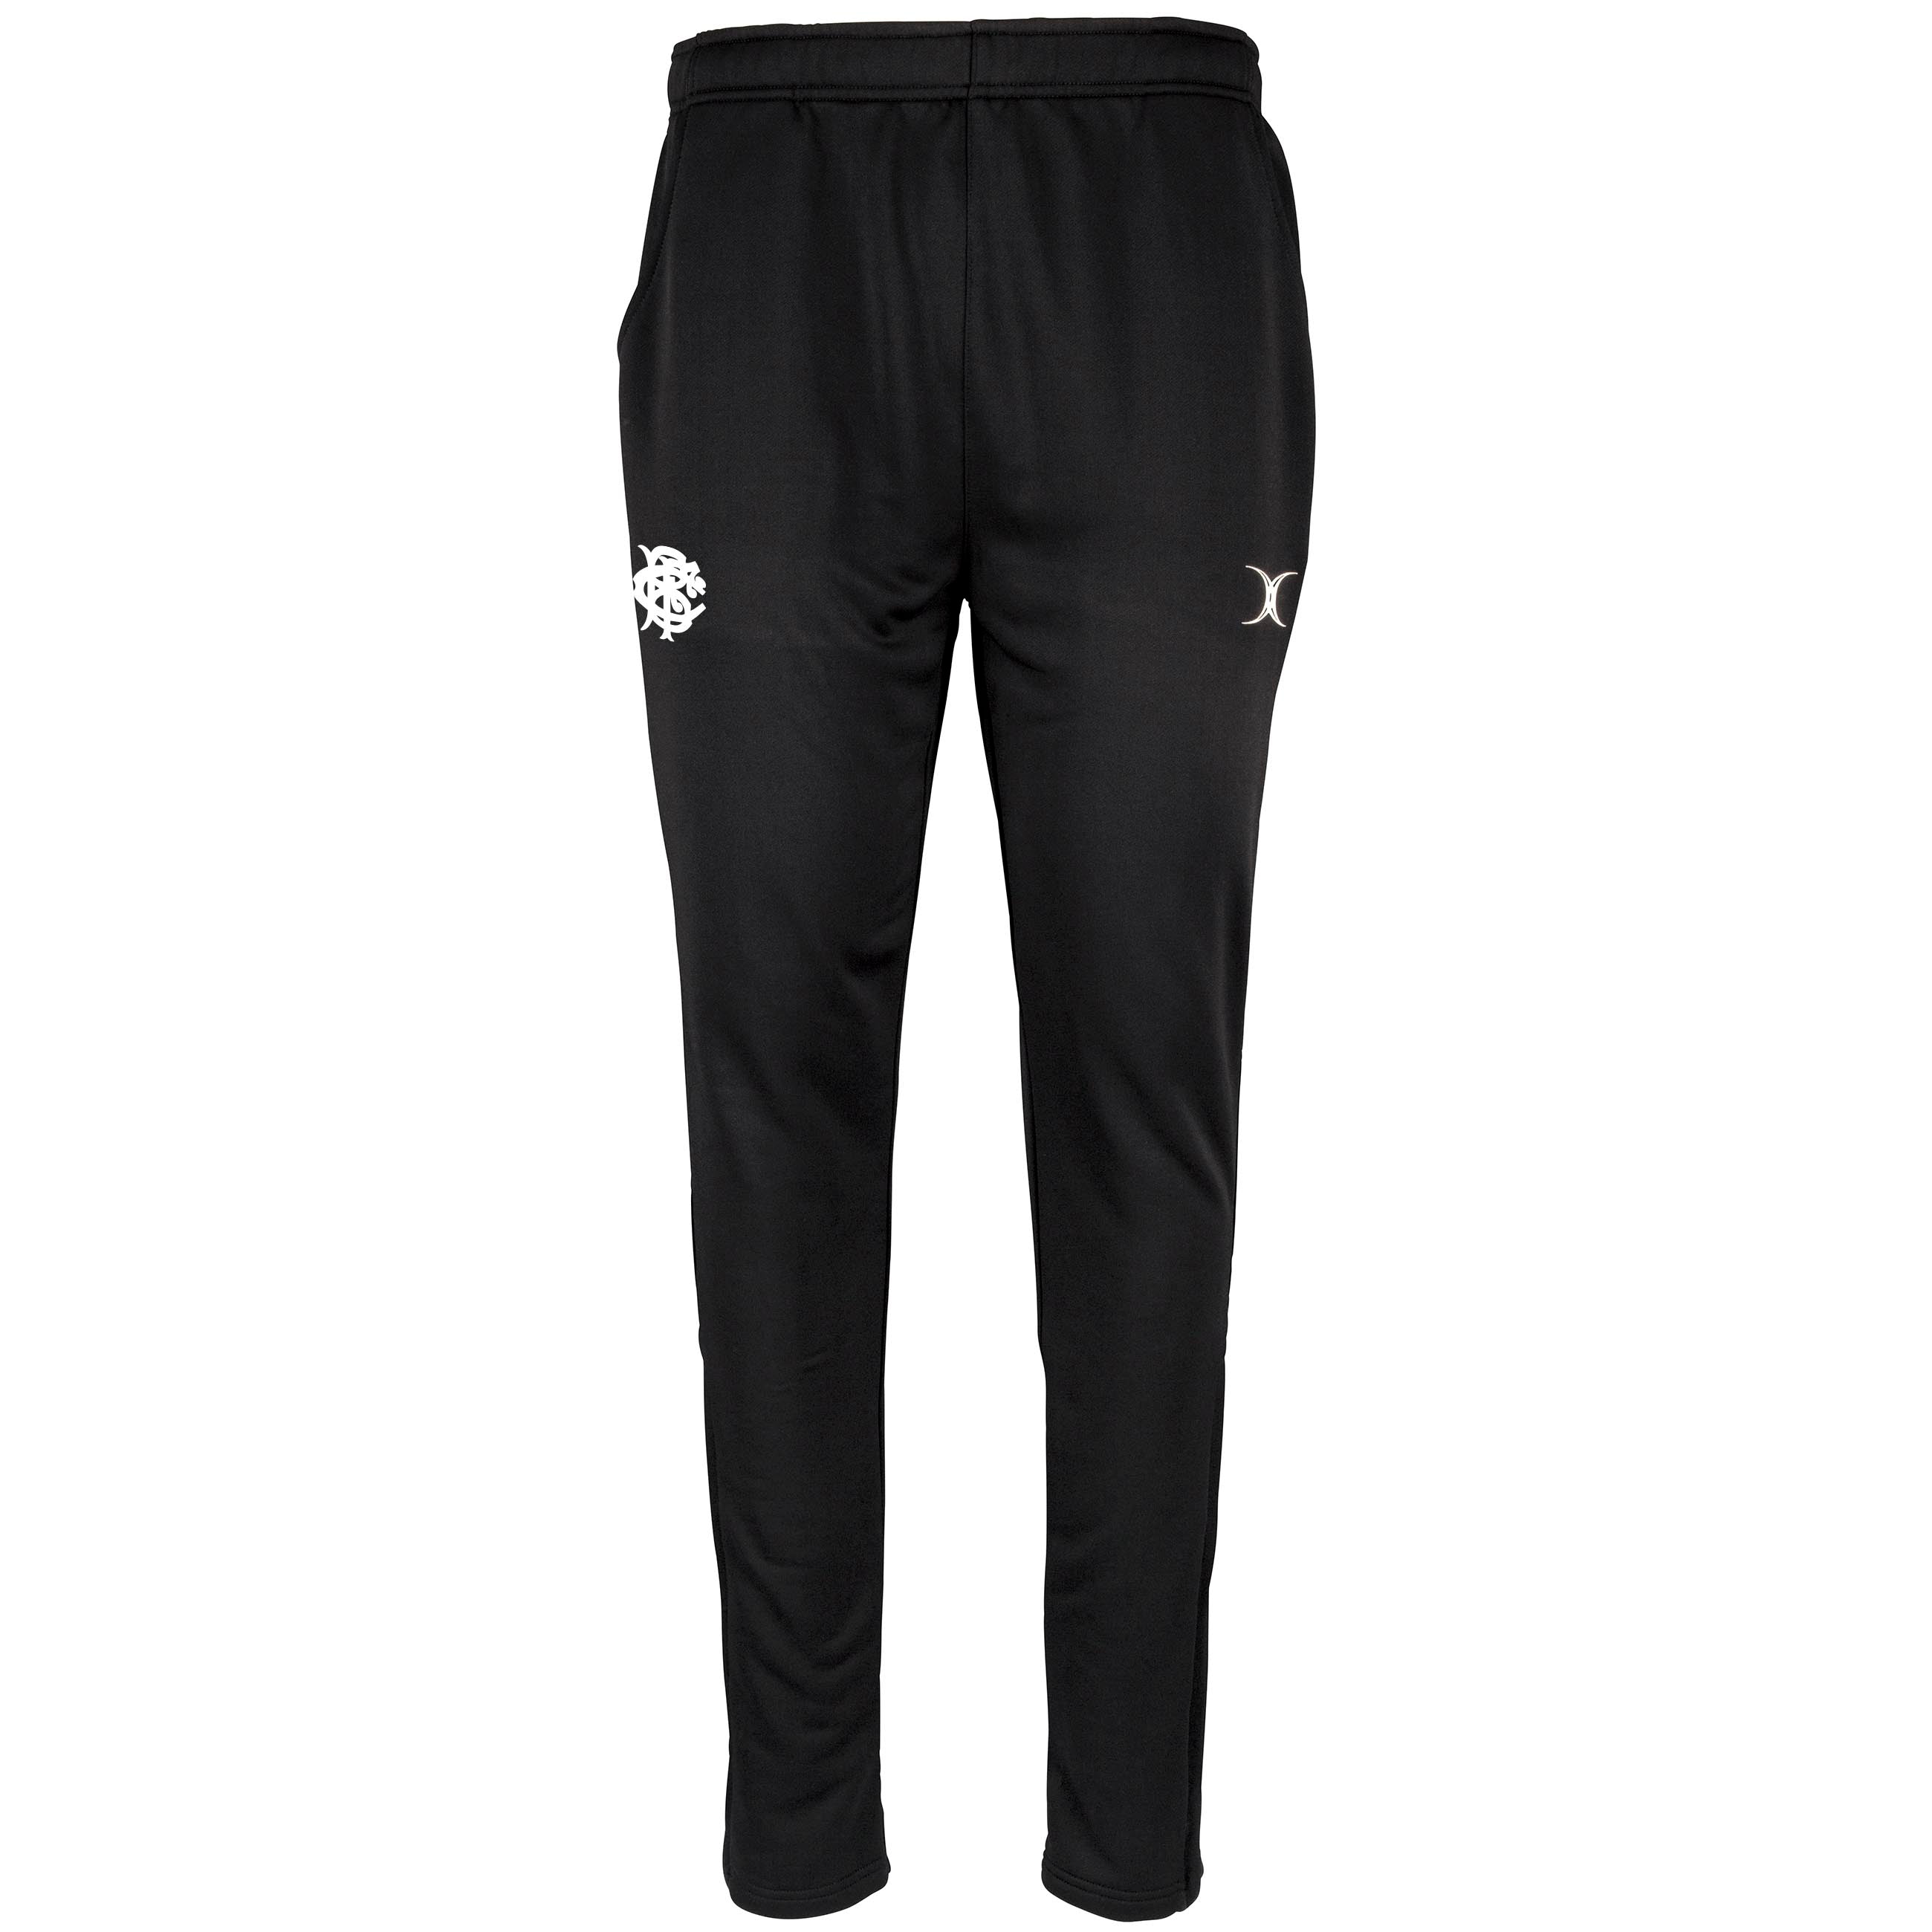 Barbarian FC Adult's Training Trousers